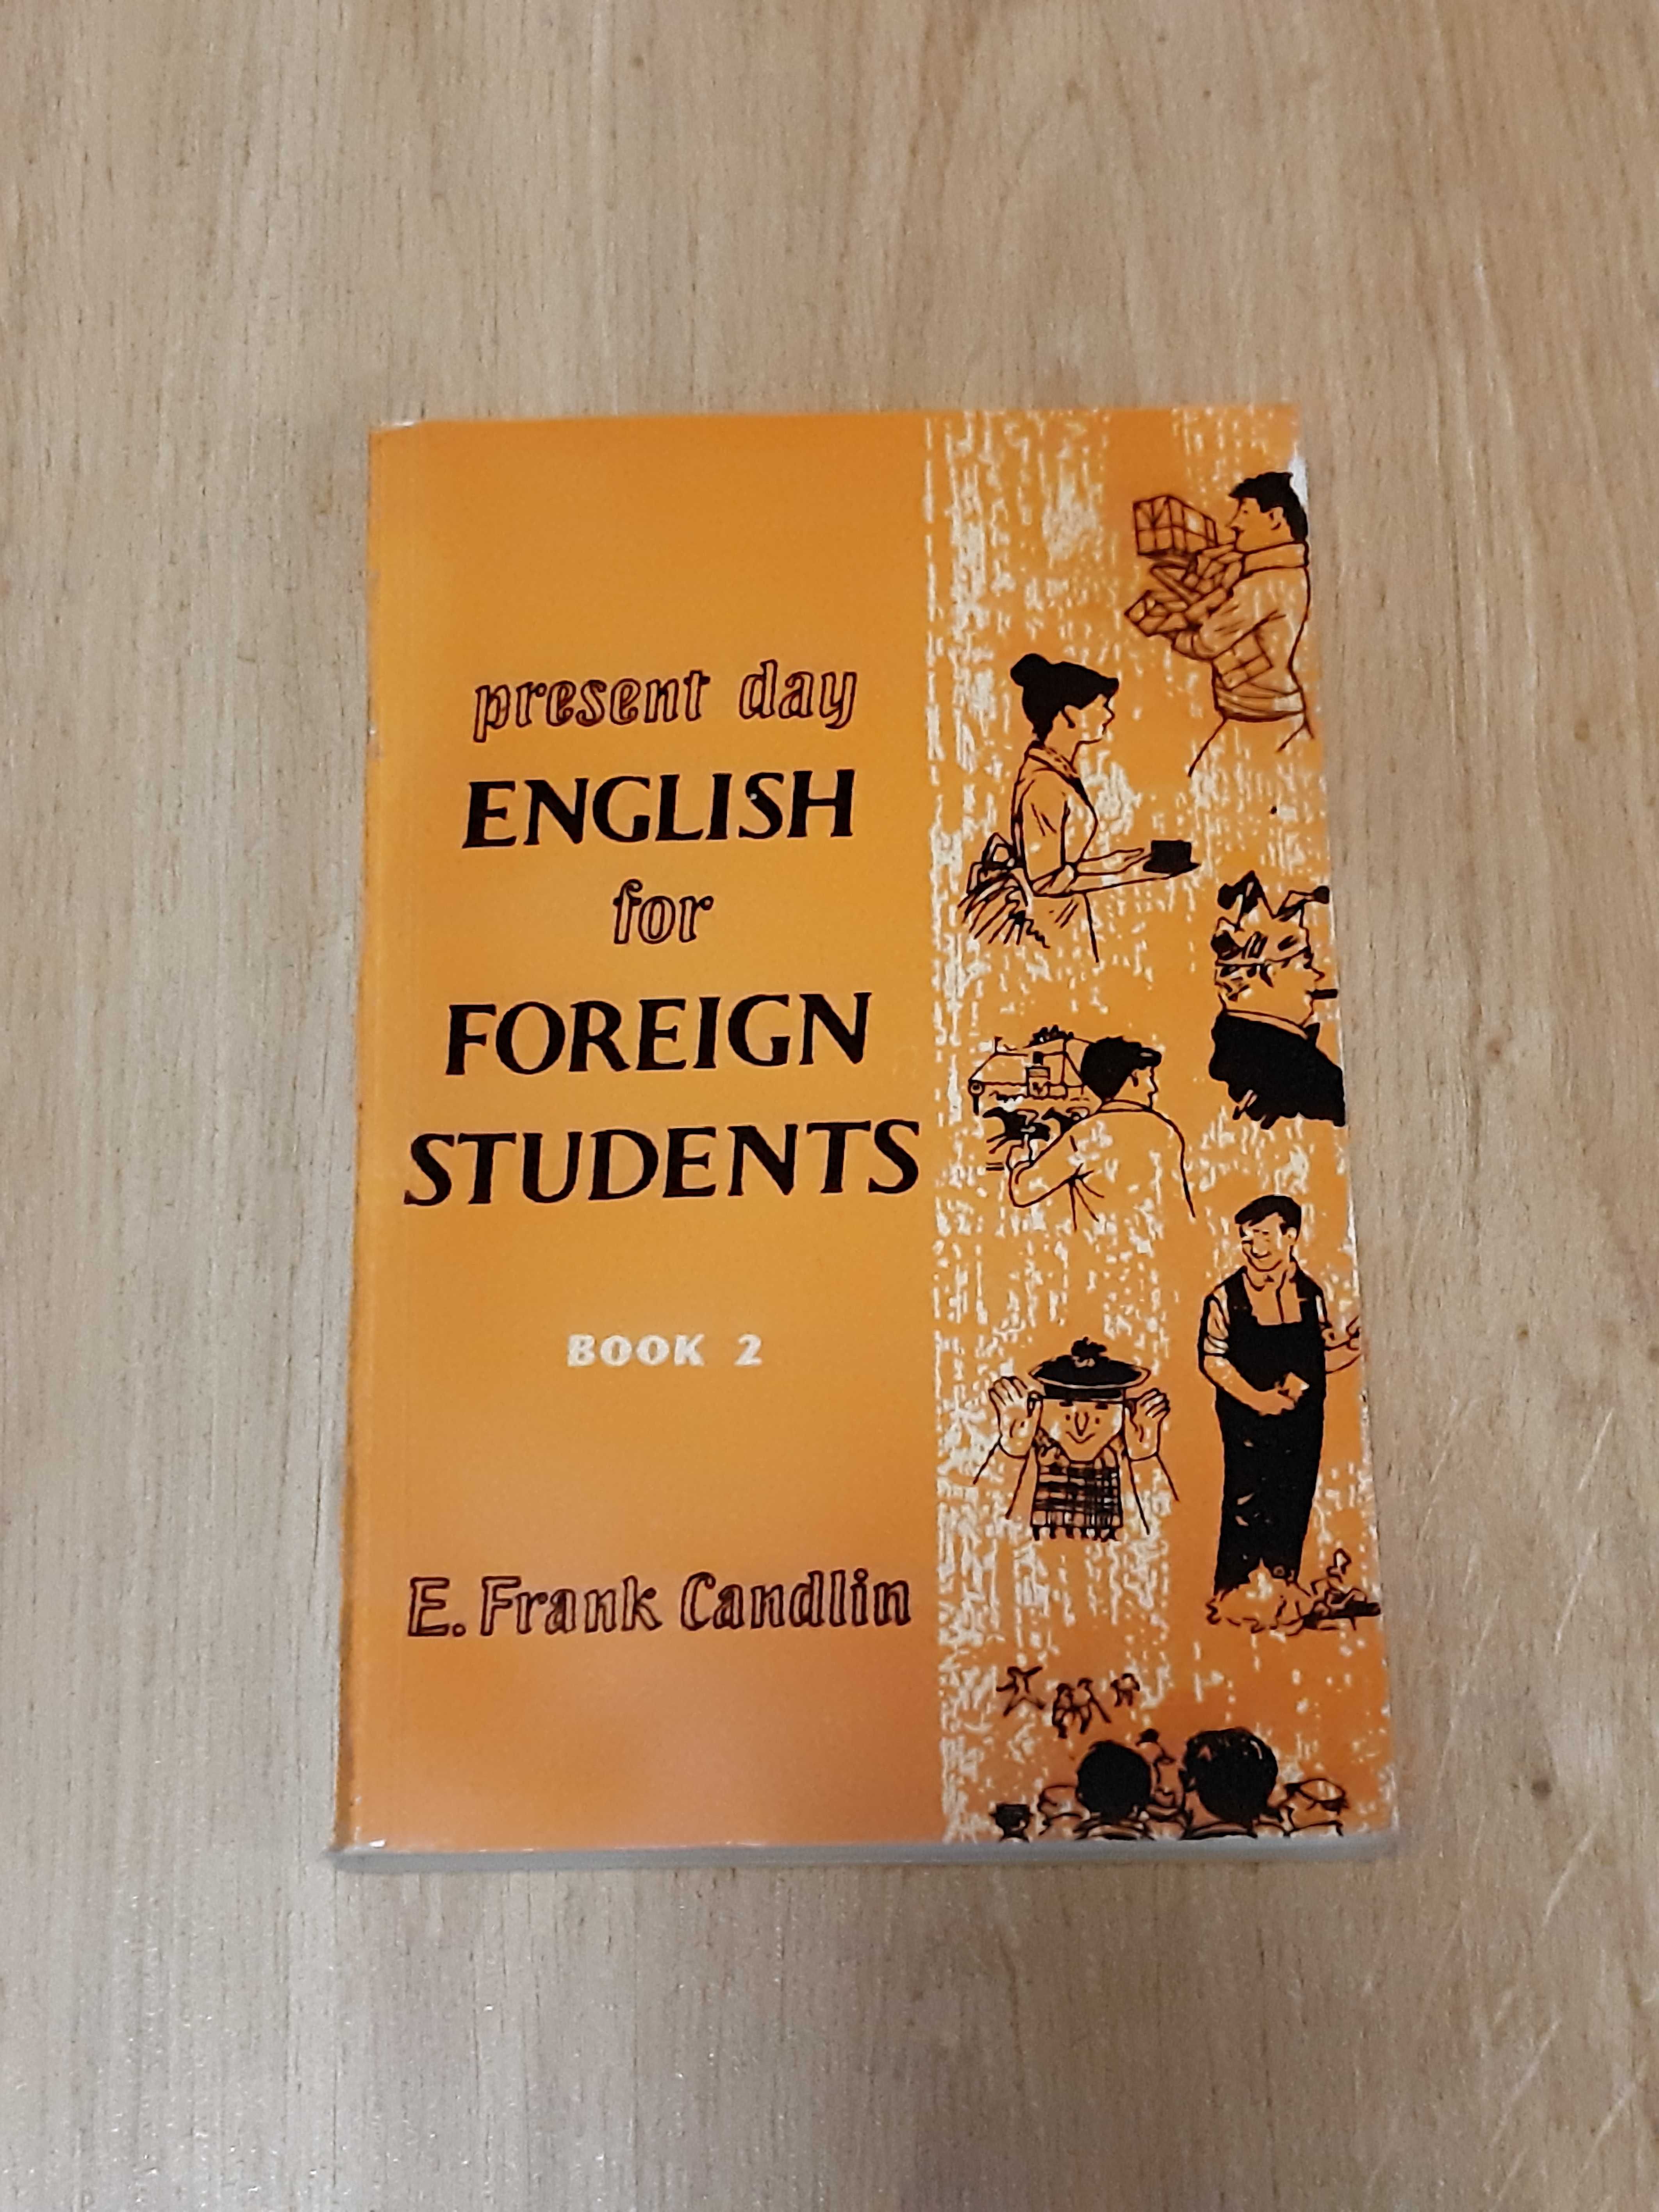 Present day English for foreign students Book 1 & Book 2 - E.F.Candlin